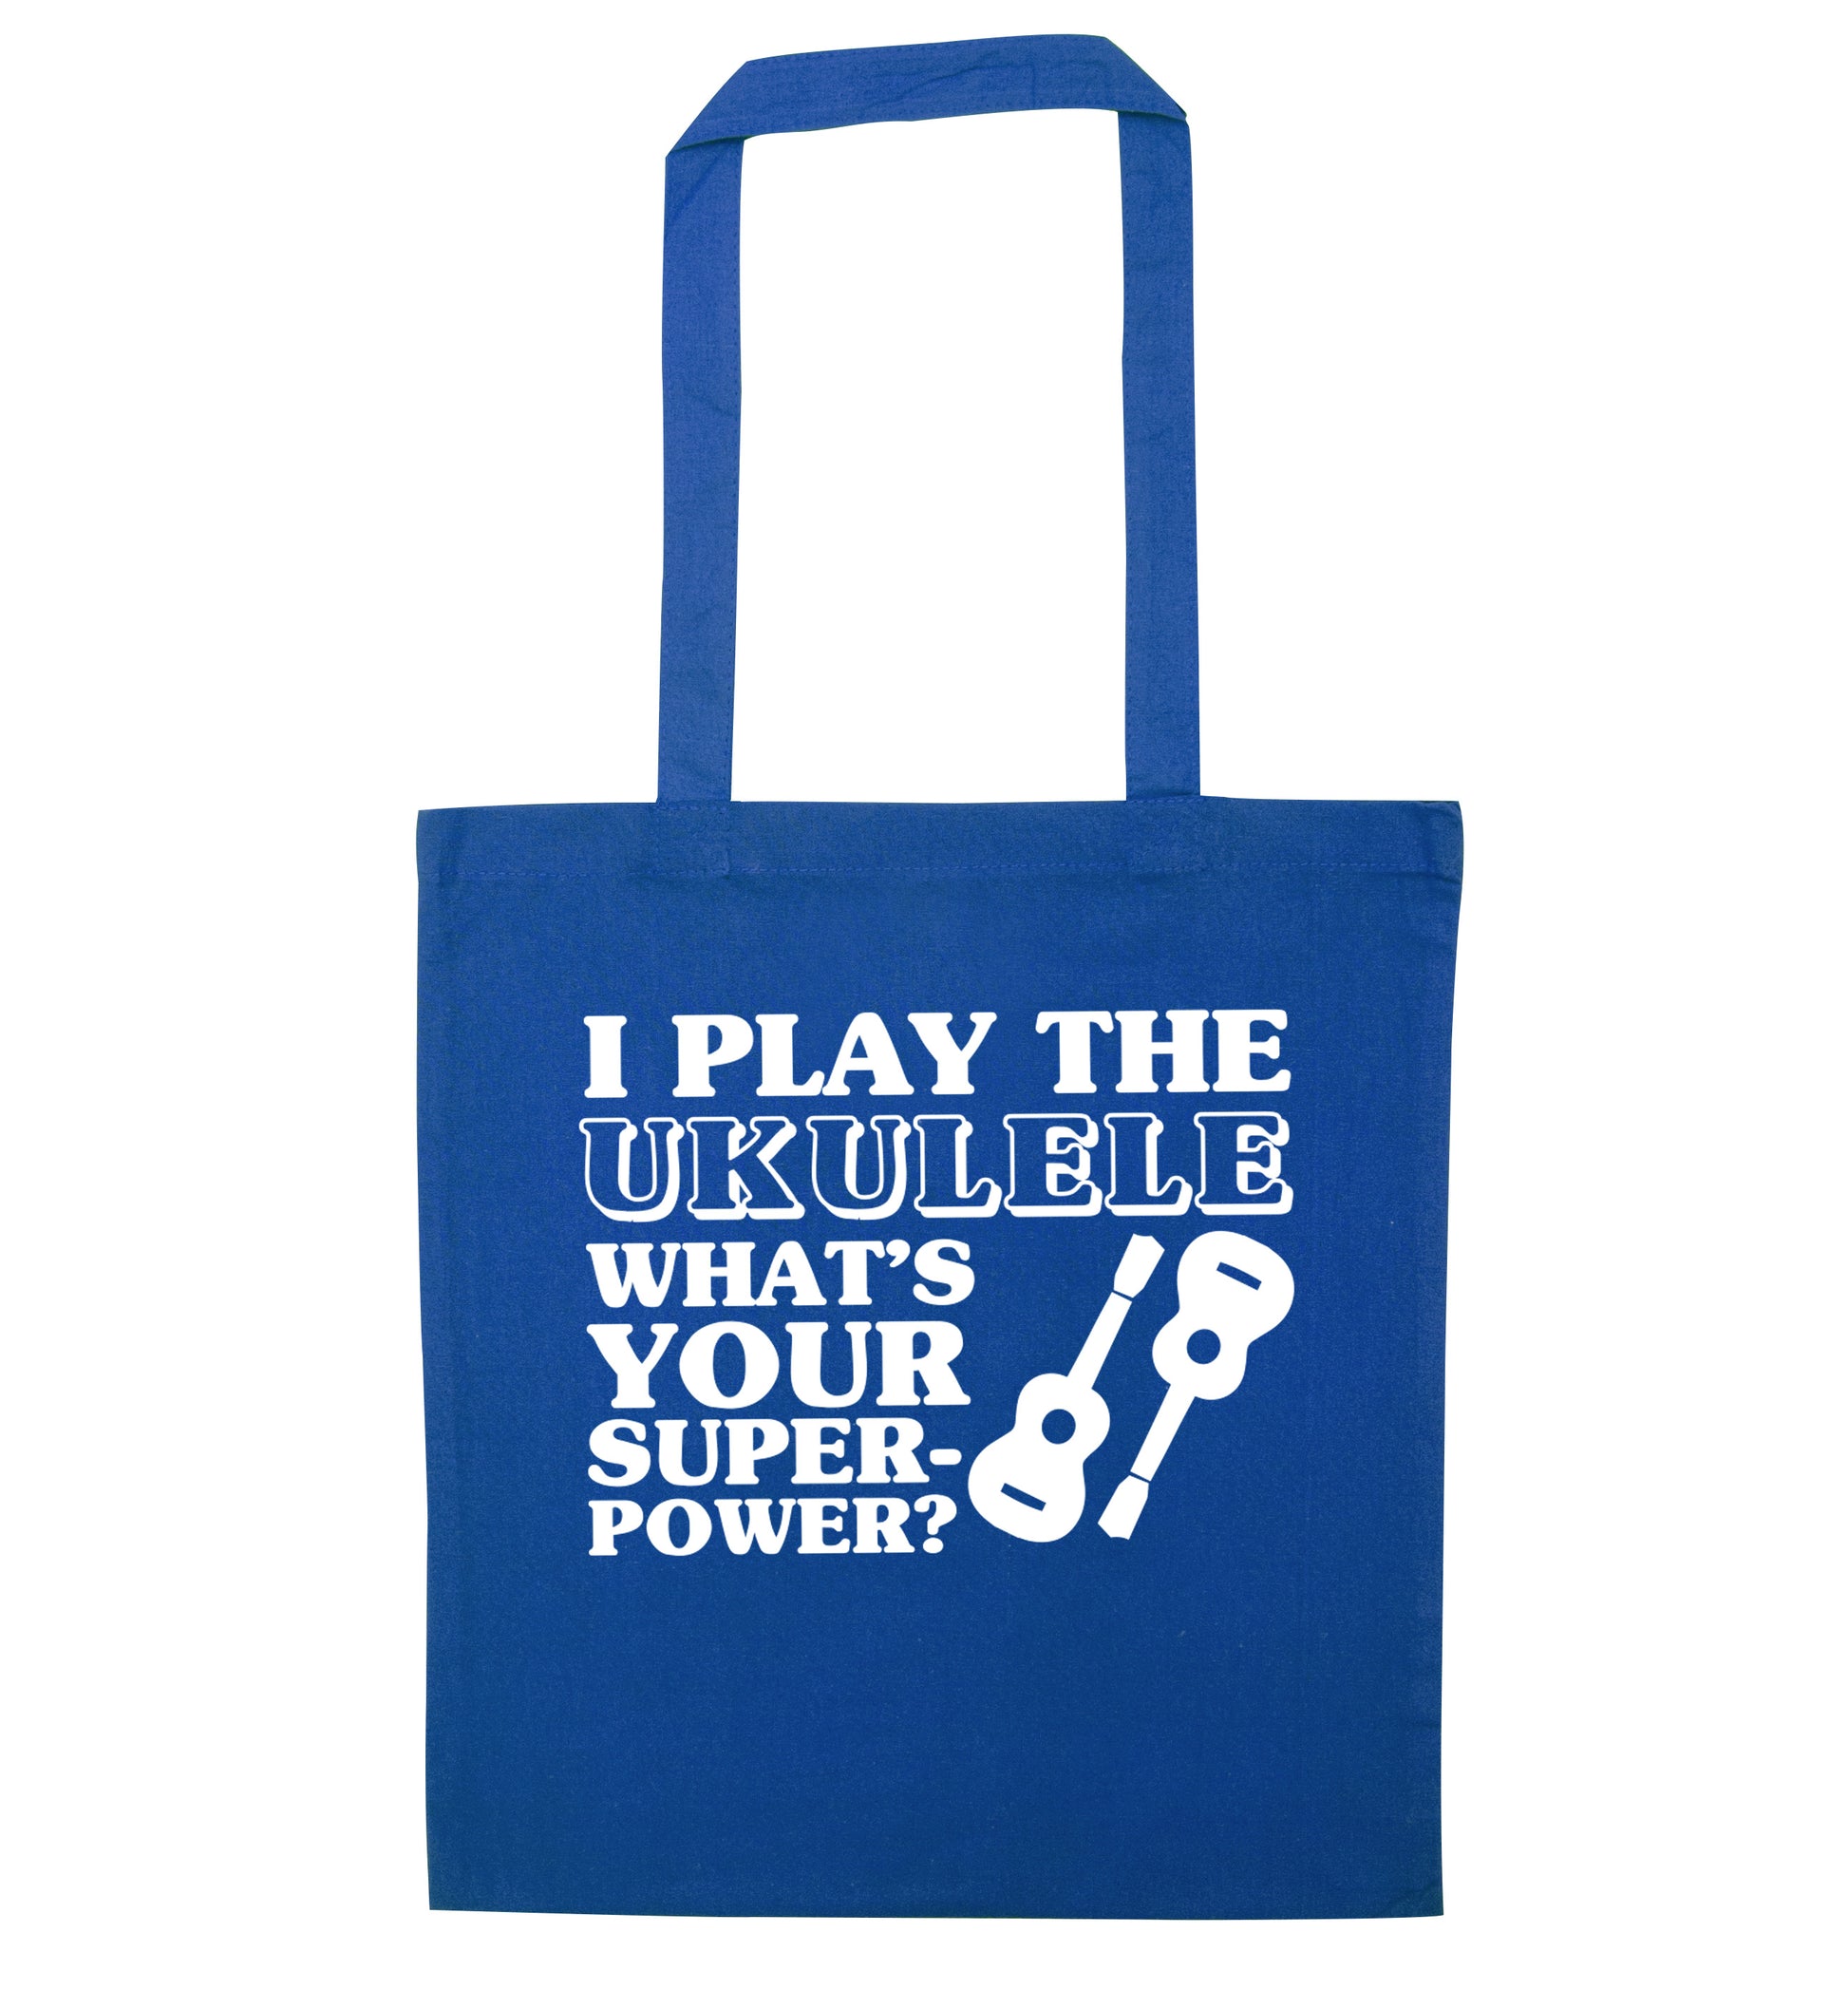 I play the ukulele what's your superpower? blue tote bag